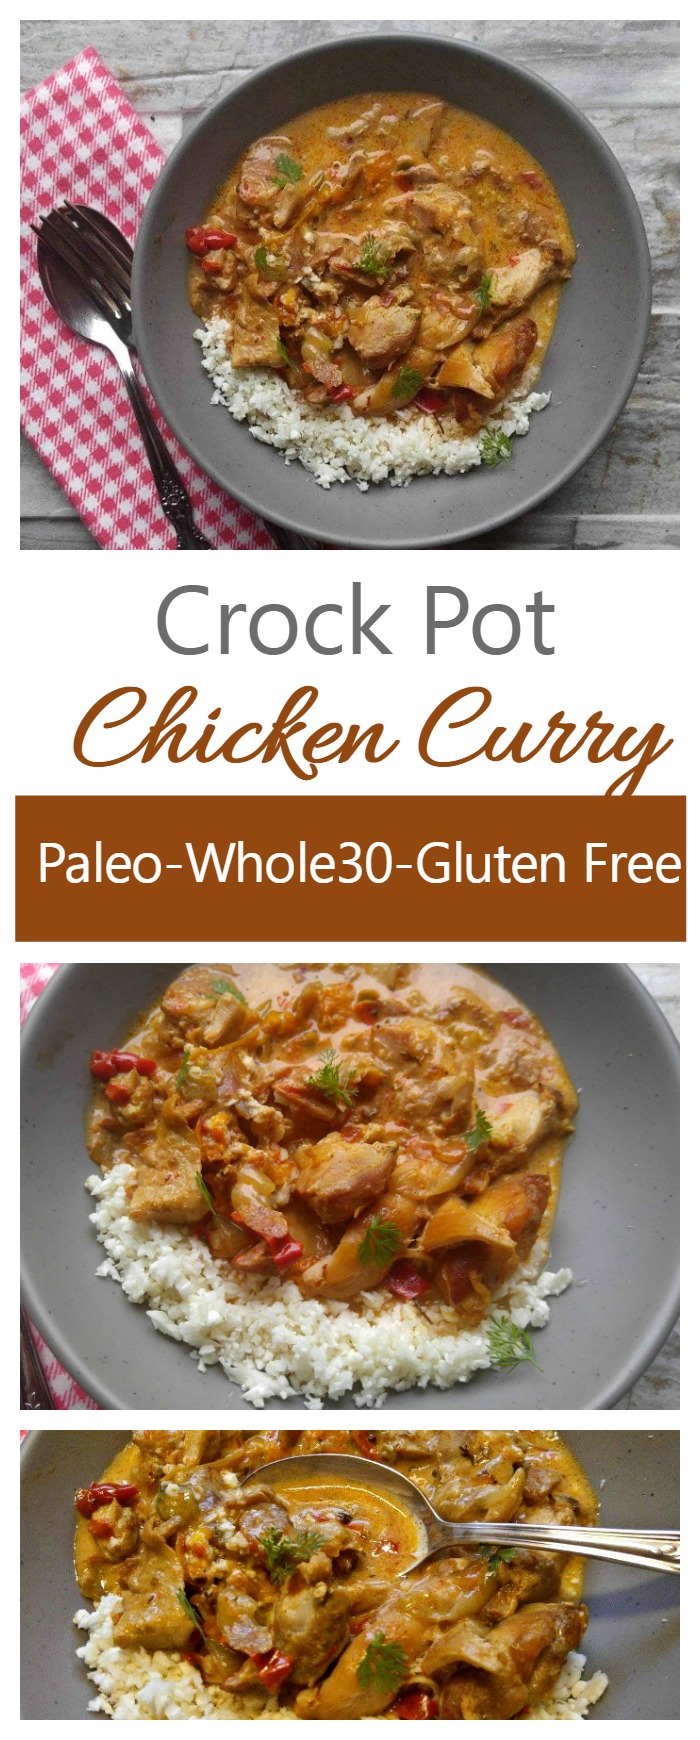 This crock pot chicken curry is just full of flavor. It's Paleo and Whole30 Compliant and also gluten free. Super easy to make and so tasty!